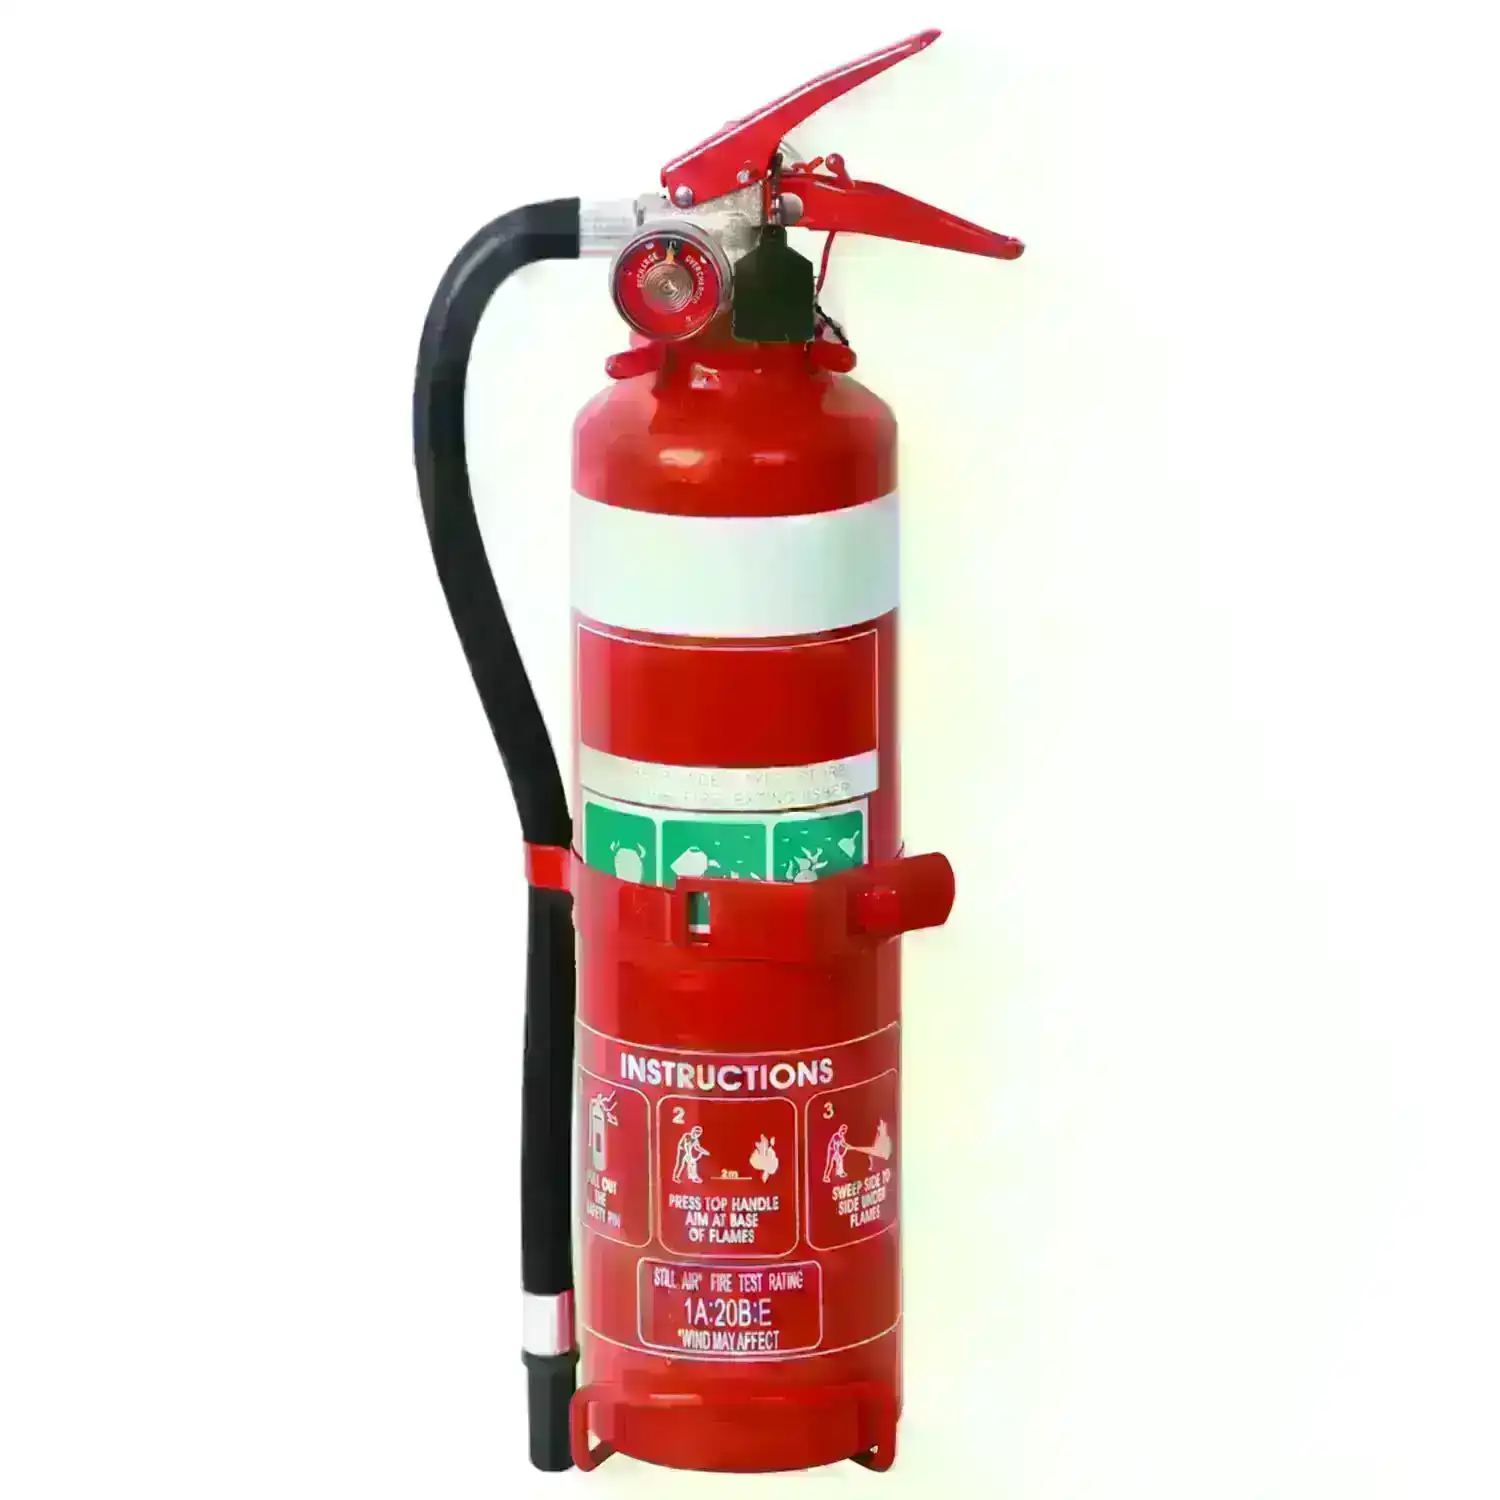 Small Volume Discharge Hose High Pressure Fire Extinguisher